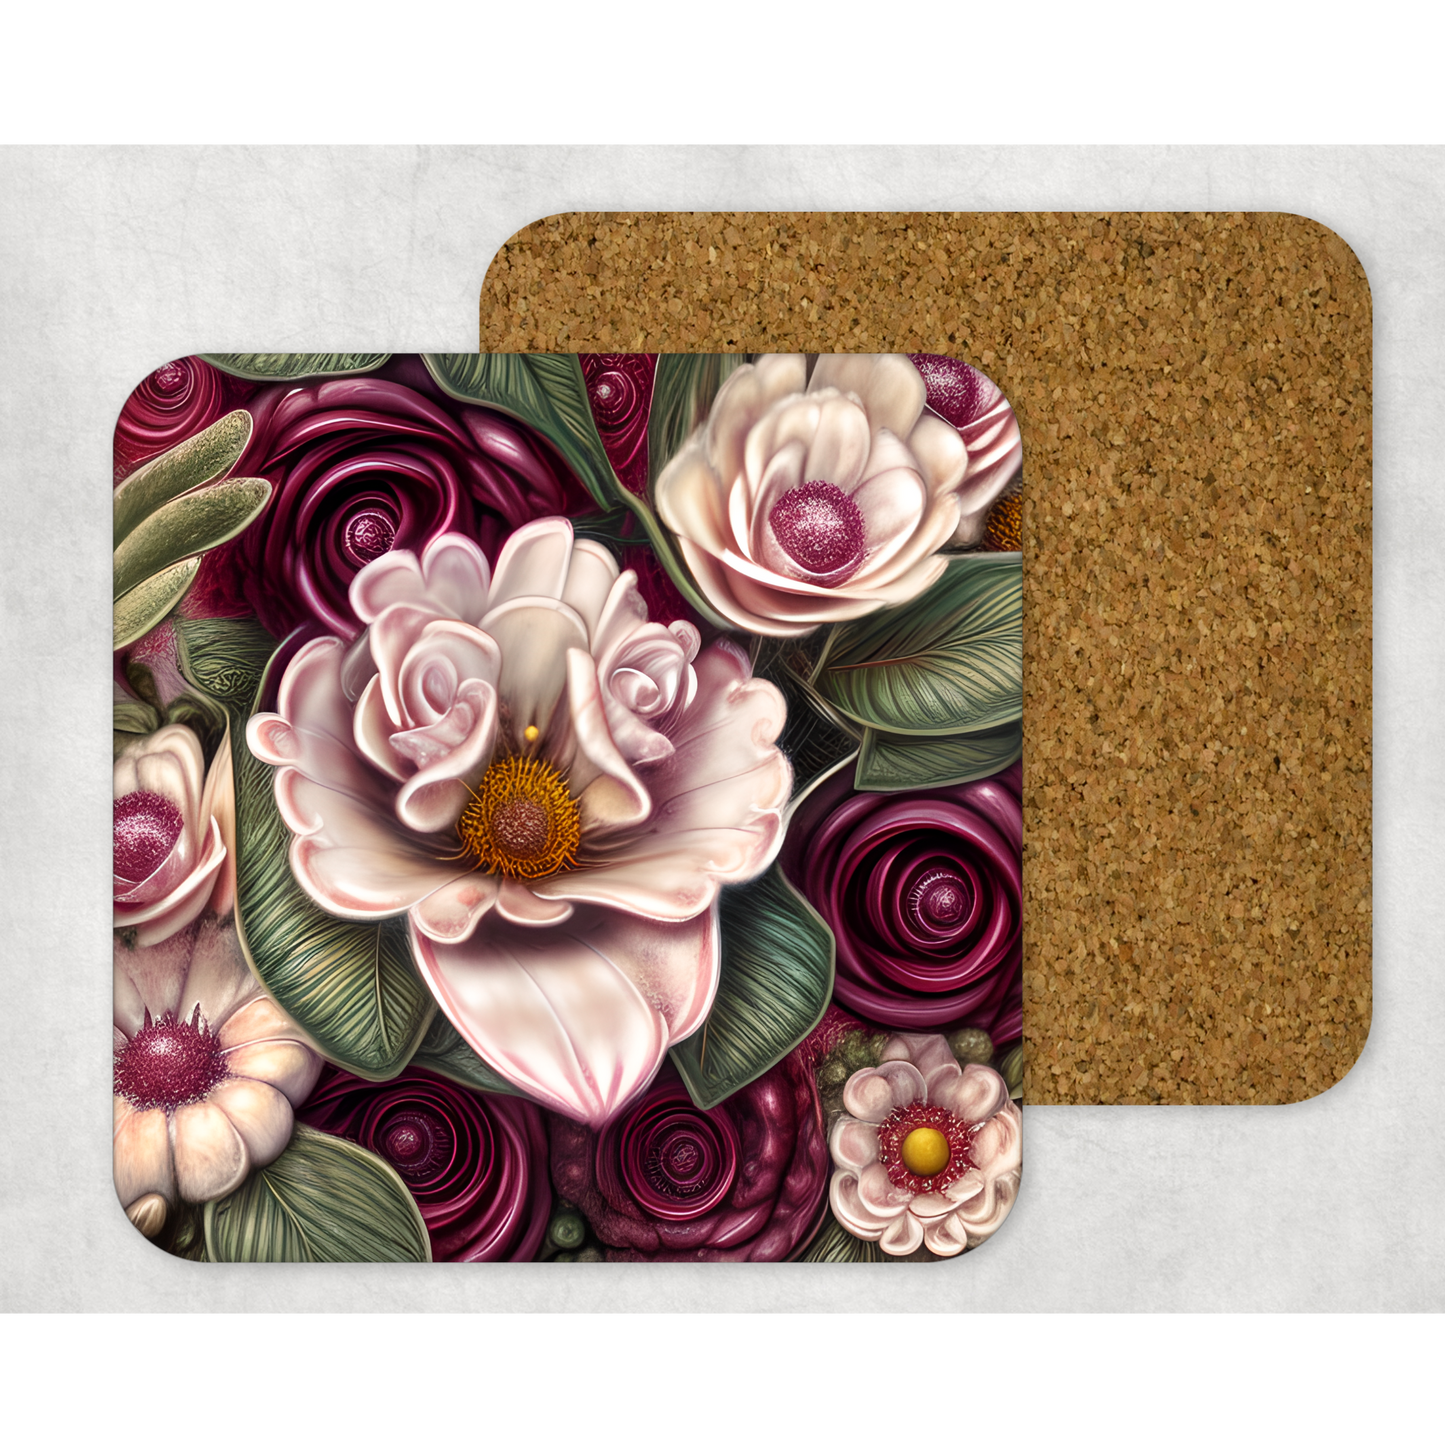 Beautifully Printed Cream, Ivory & Burgundy 3D Flowers Wooden Coasters for Stylish Home Décor